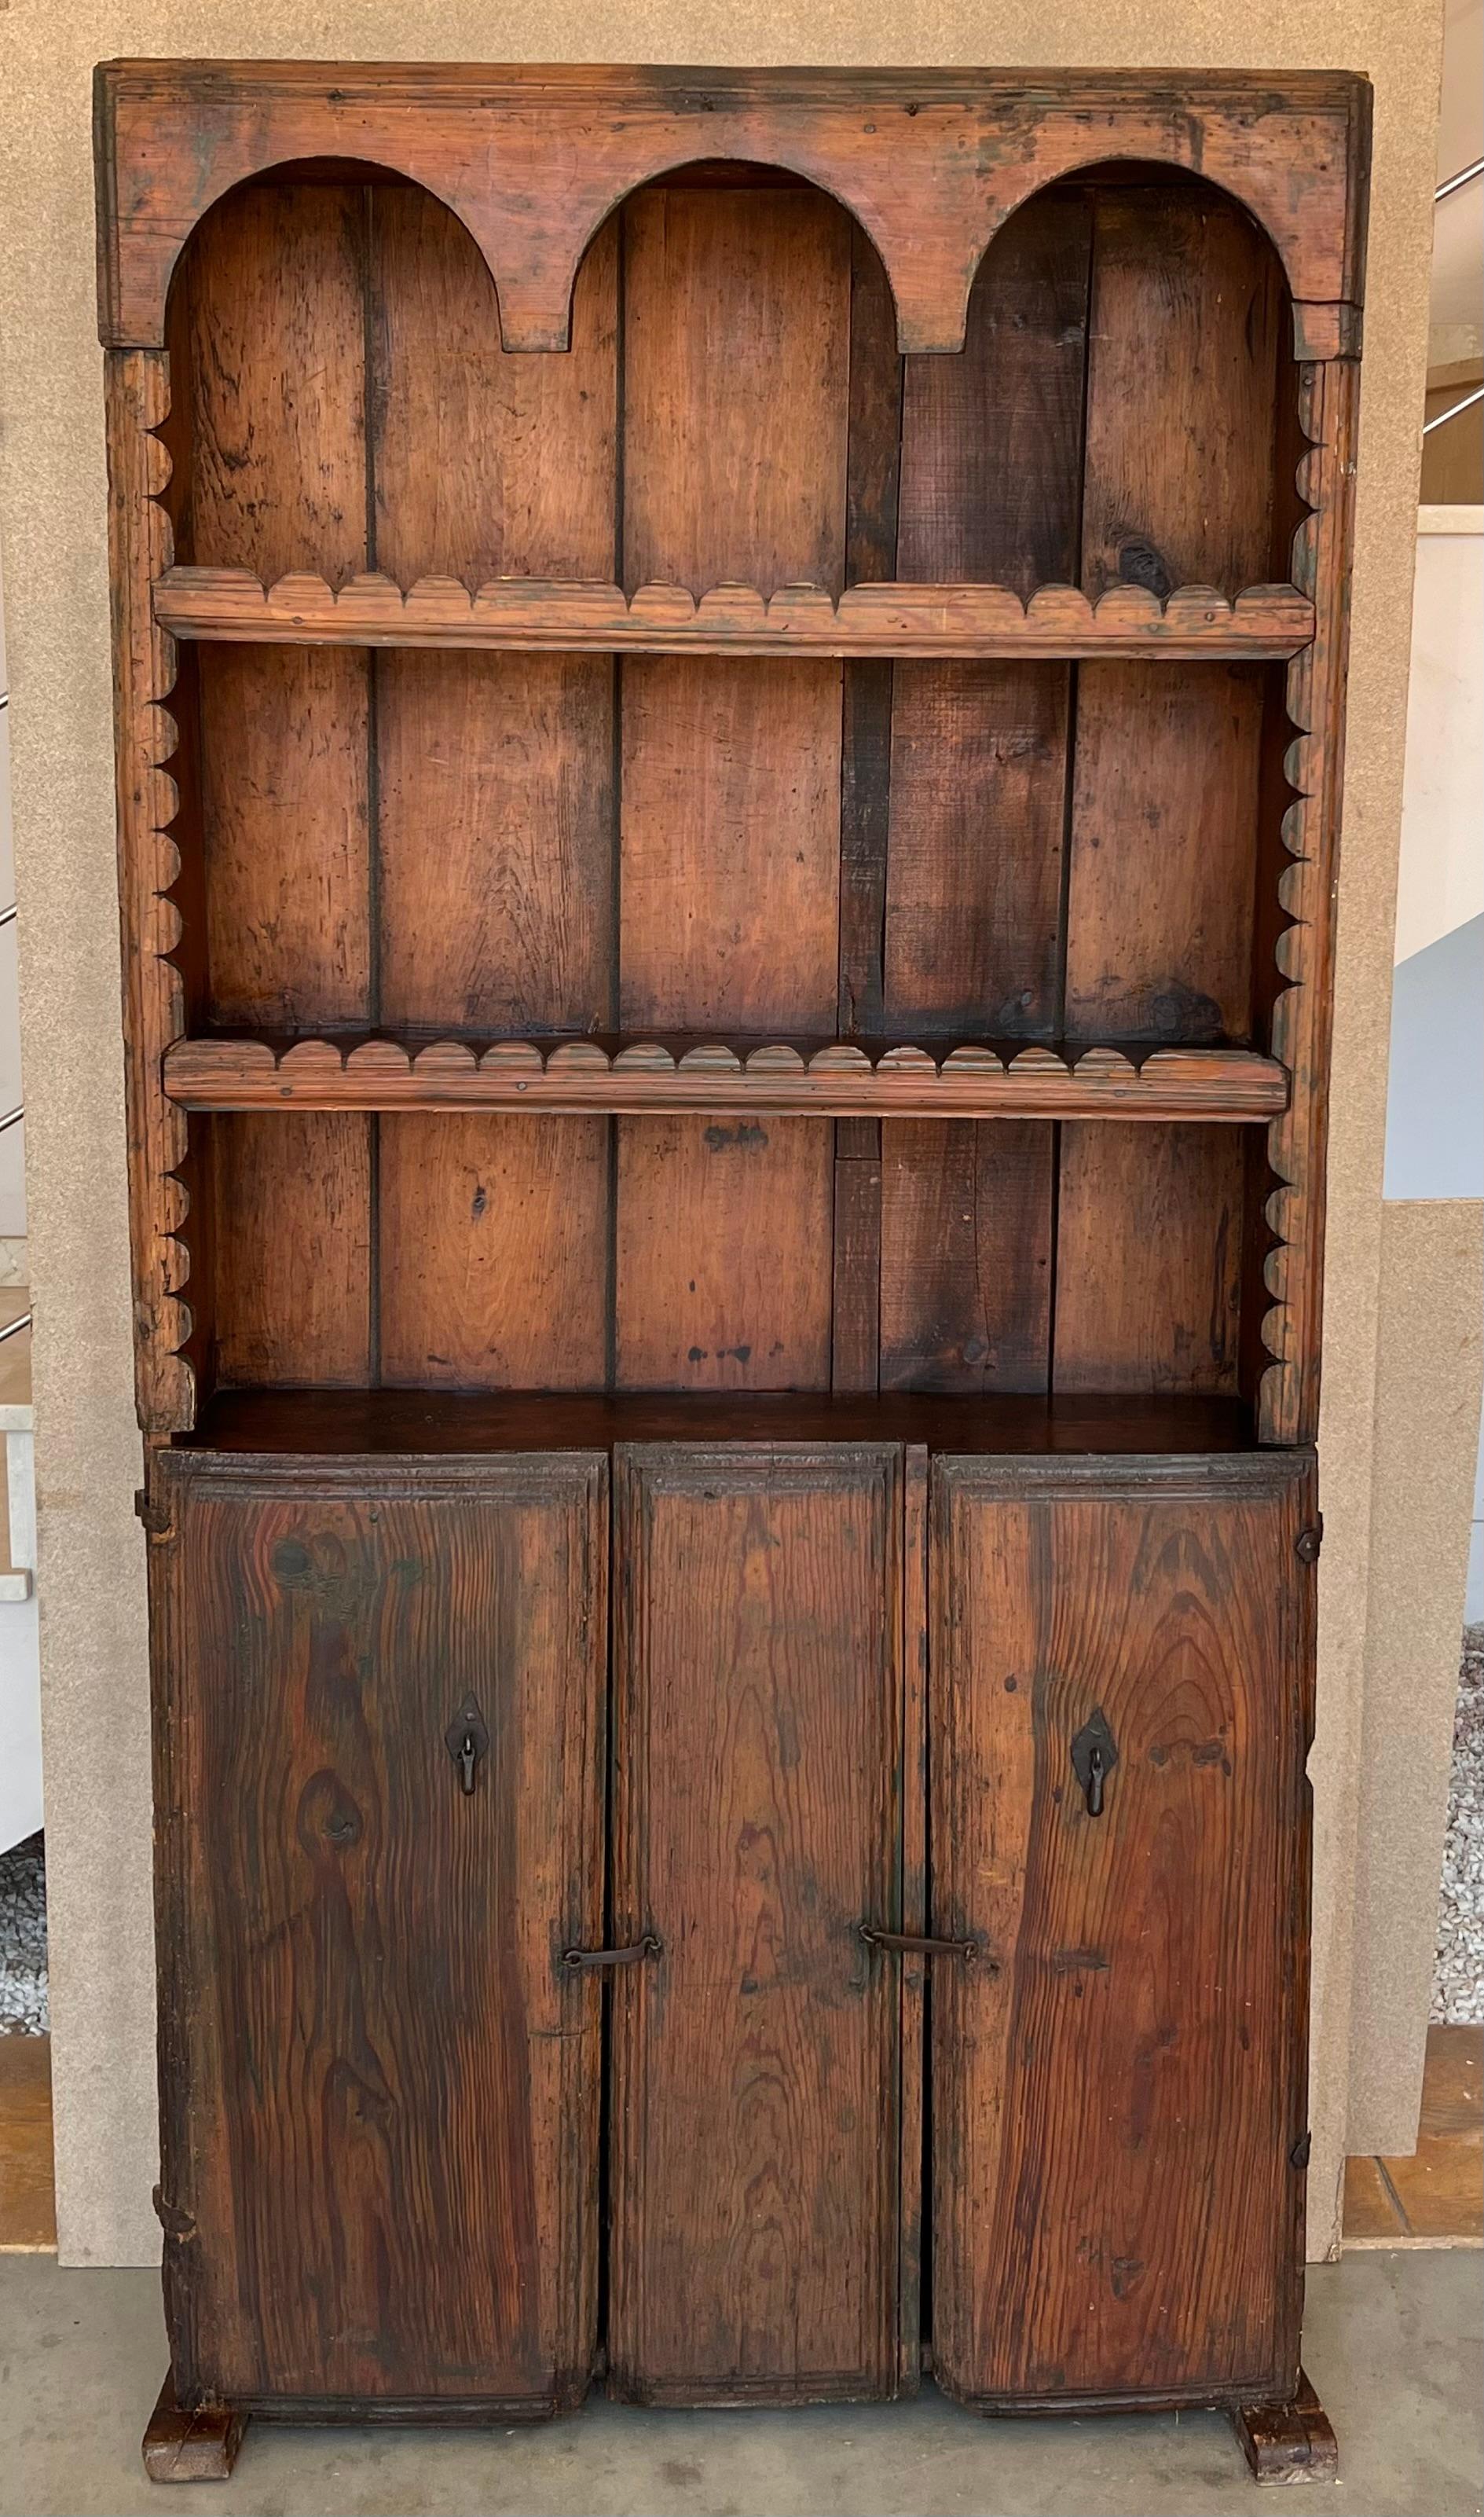 Grand 20th century Spanish cupboard or buffet constructed from walnut. Features a open shelve fronted by two doors in the low part. This massive cabinet made in Spain features beautiful walnut grain and showcases the amazing craftsmanship. There is